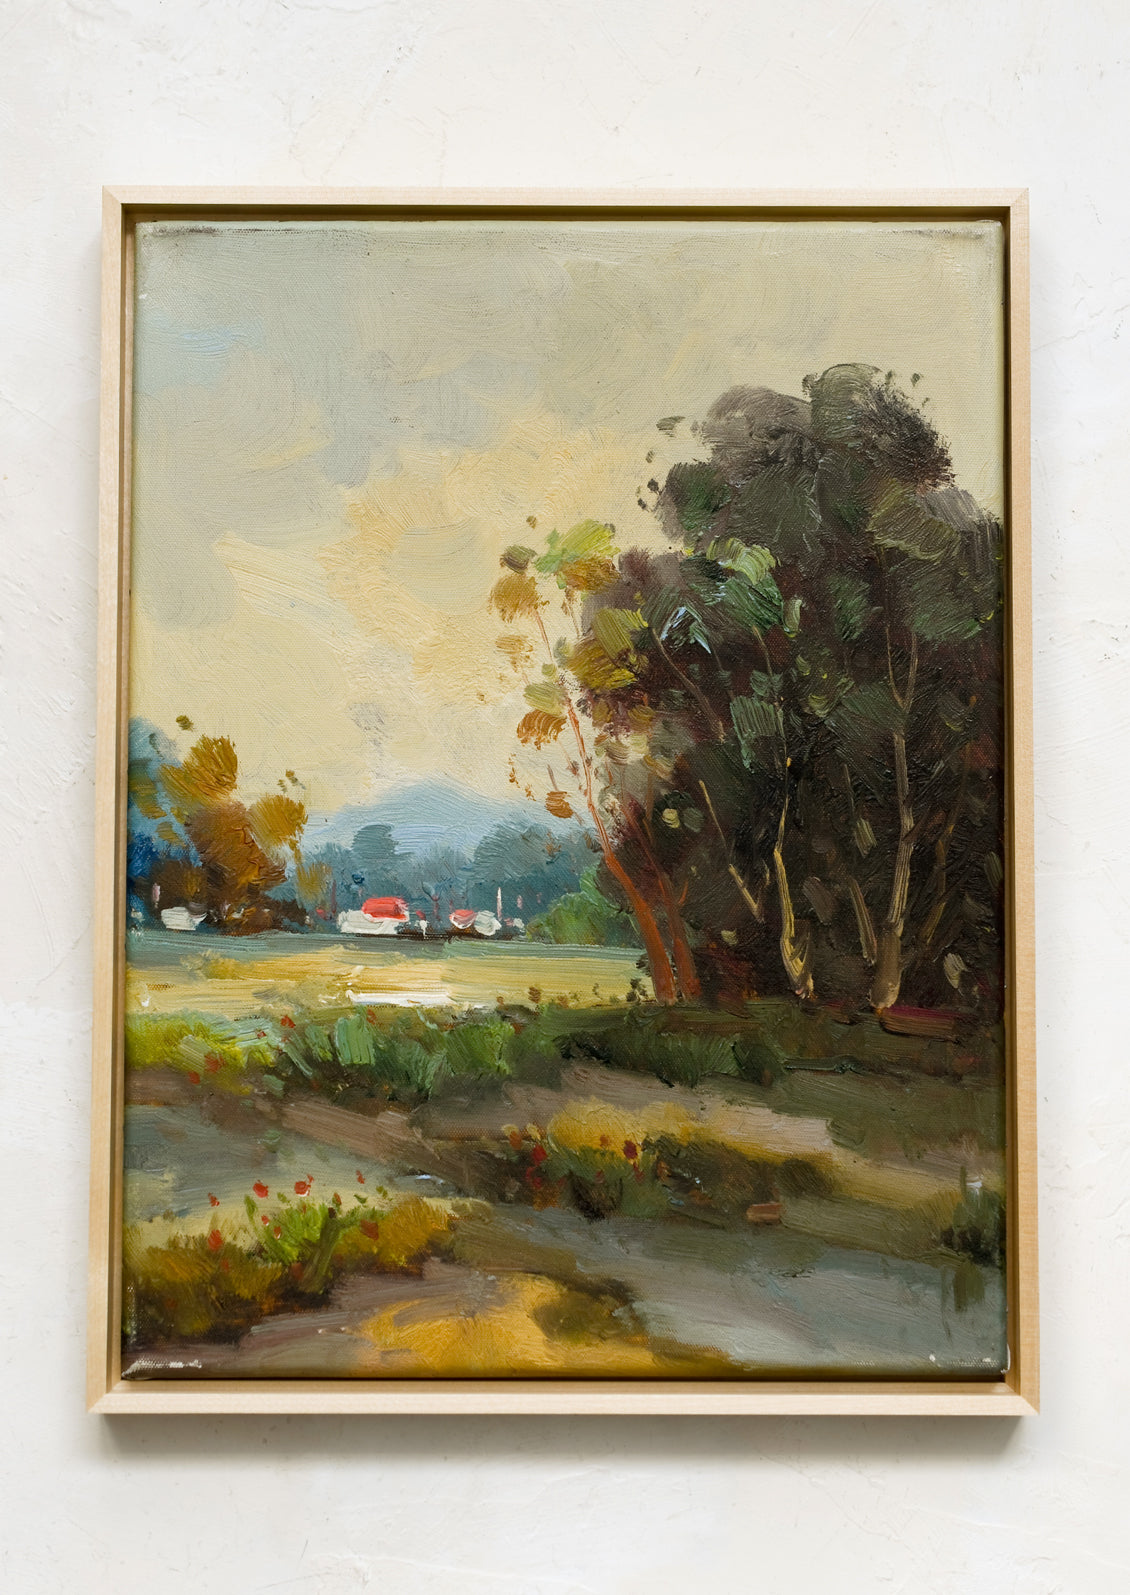 A framed landscape oil painting of trees and houses near a creek.